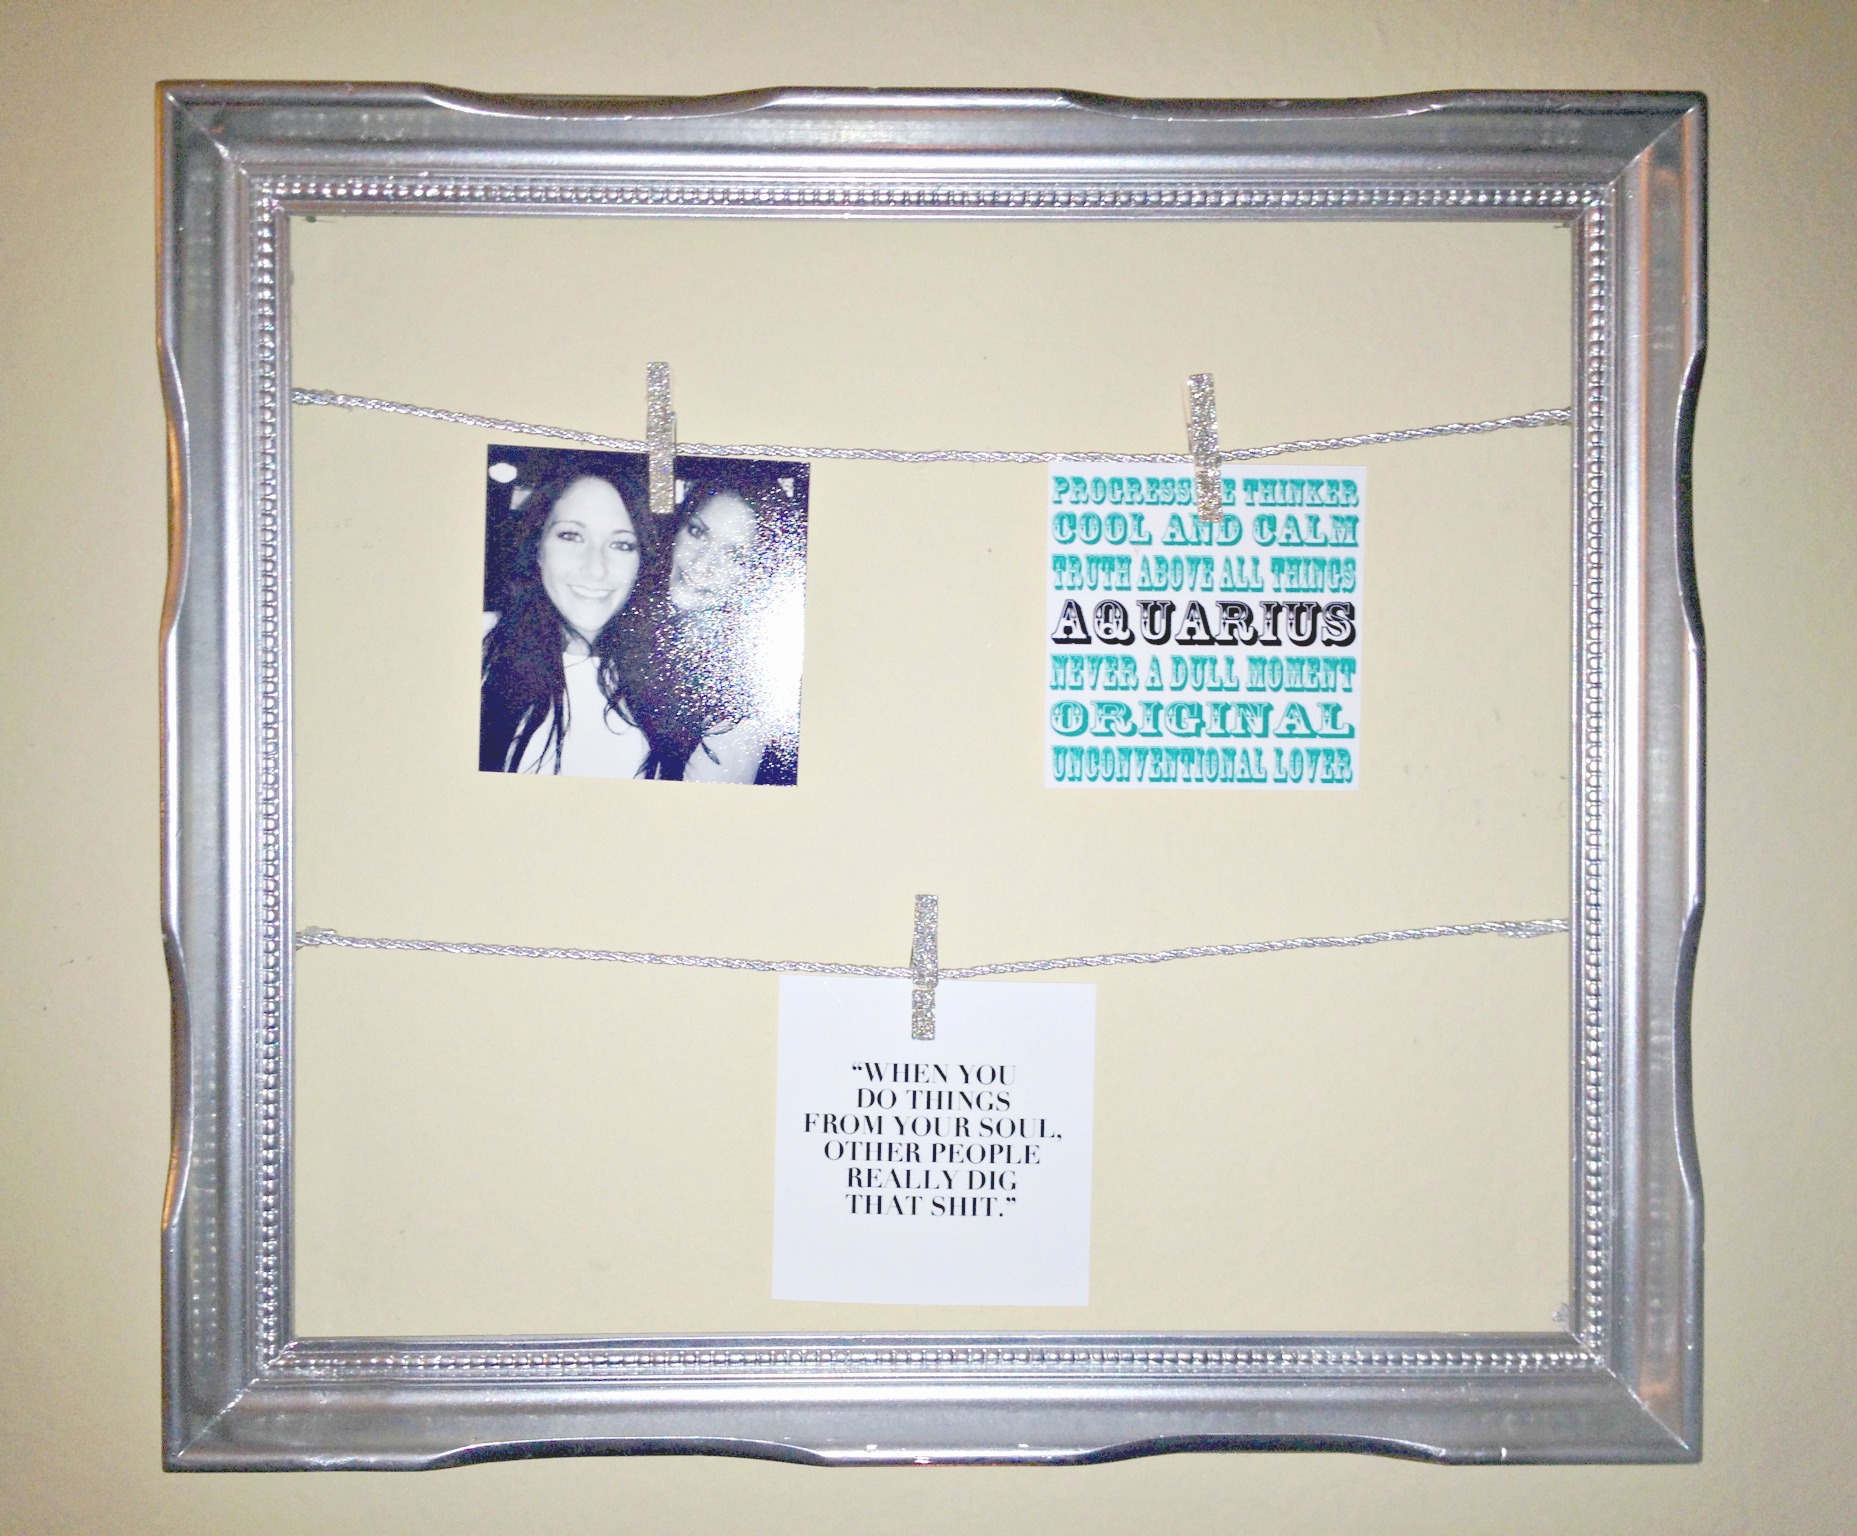 Instagram Photo Frame by Twinspiration: https://twinspiration.co/instagram_photo_frame/